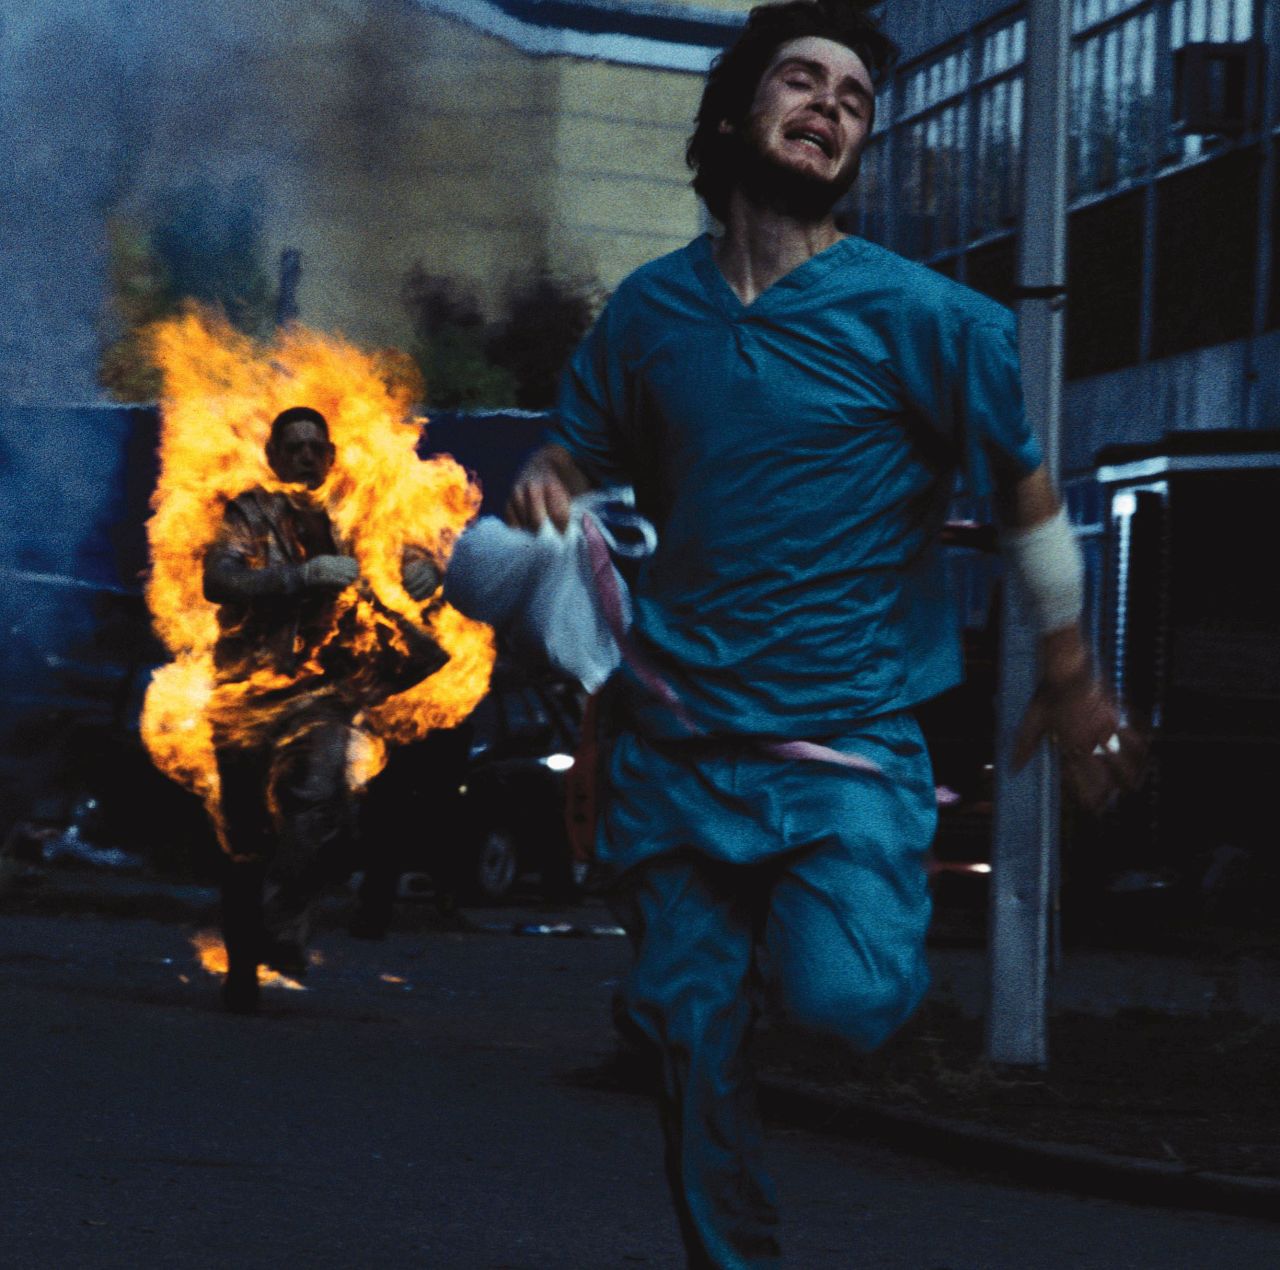 Cillian Murphy fleeing fast zombies in "28 Days Later" (2002).